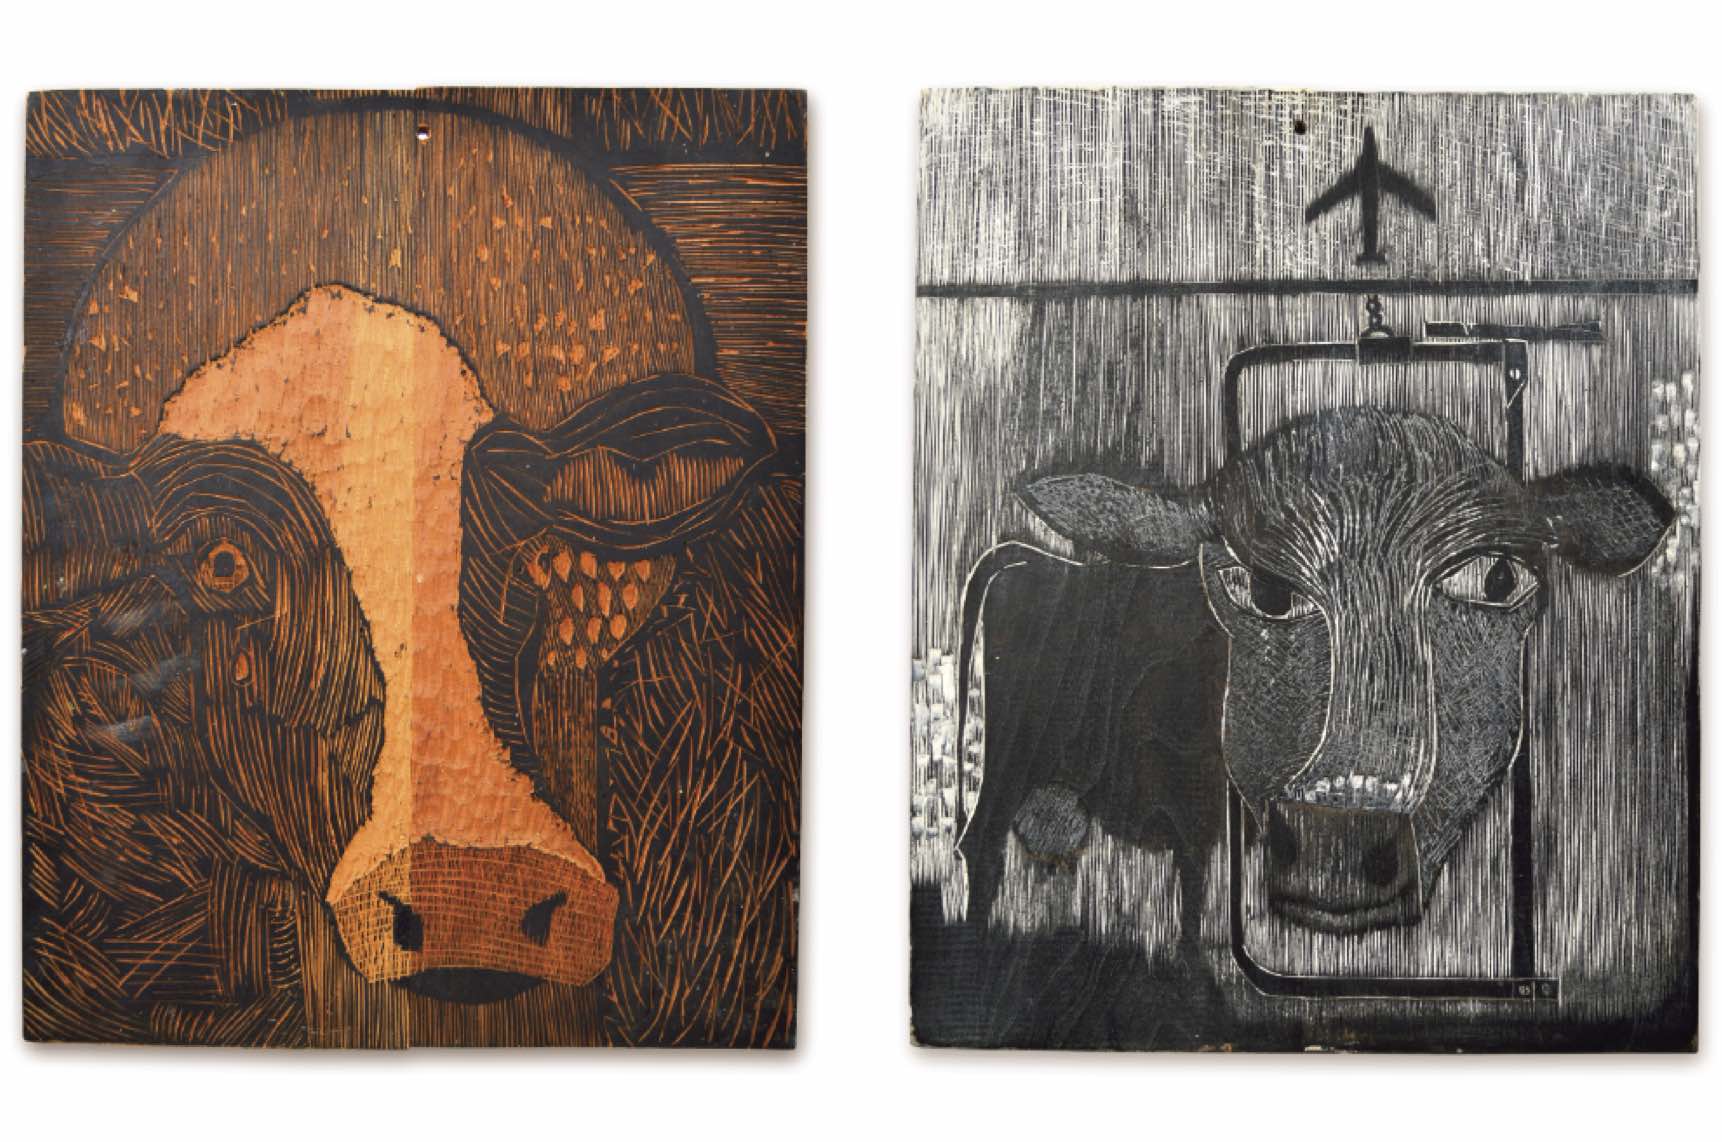 2 of Eugene's artwork - two cows